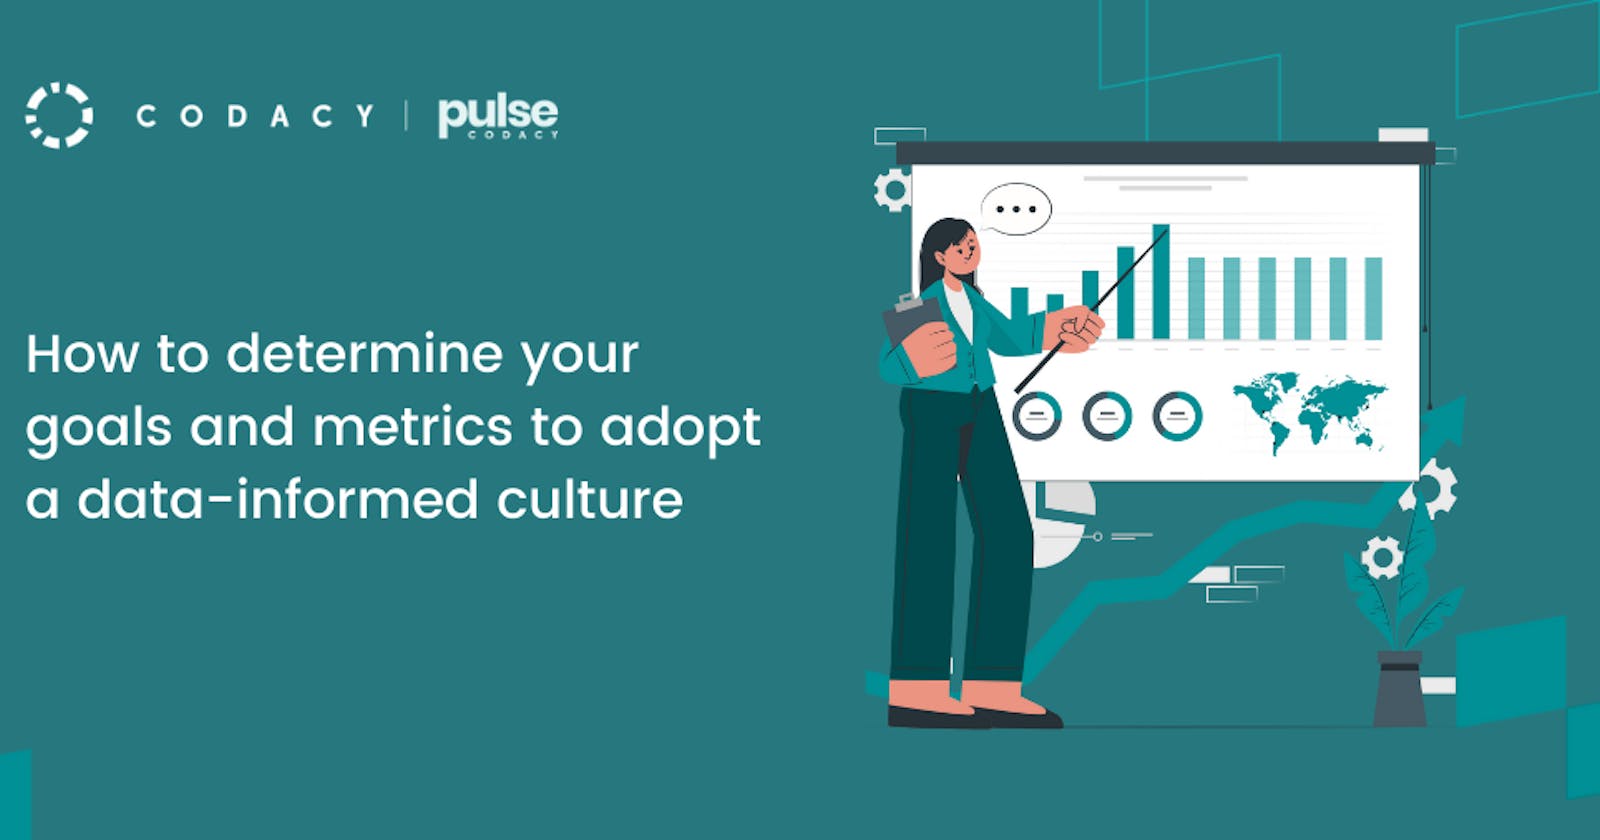 How to determine your goals and metrics to adopt a data-informed culture